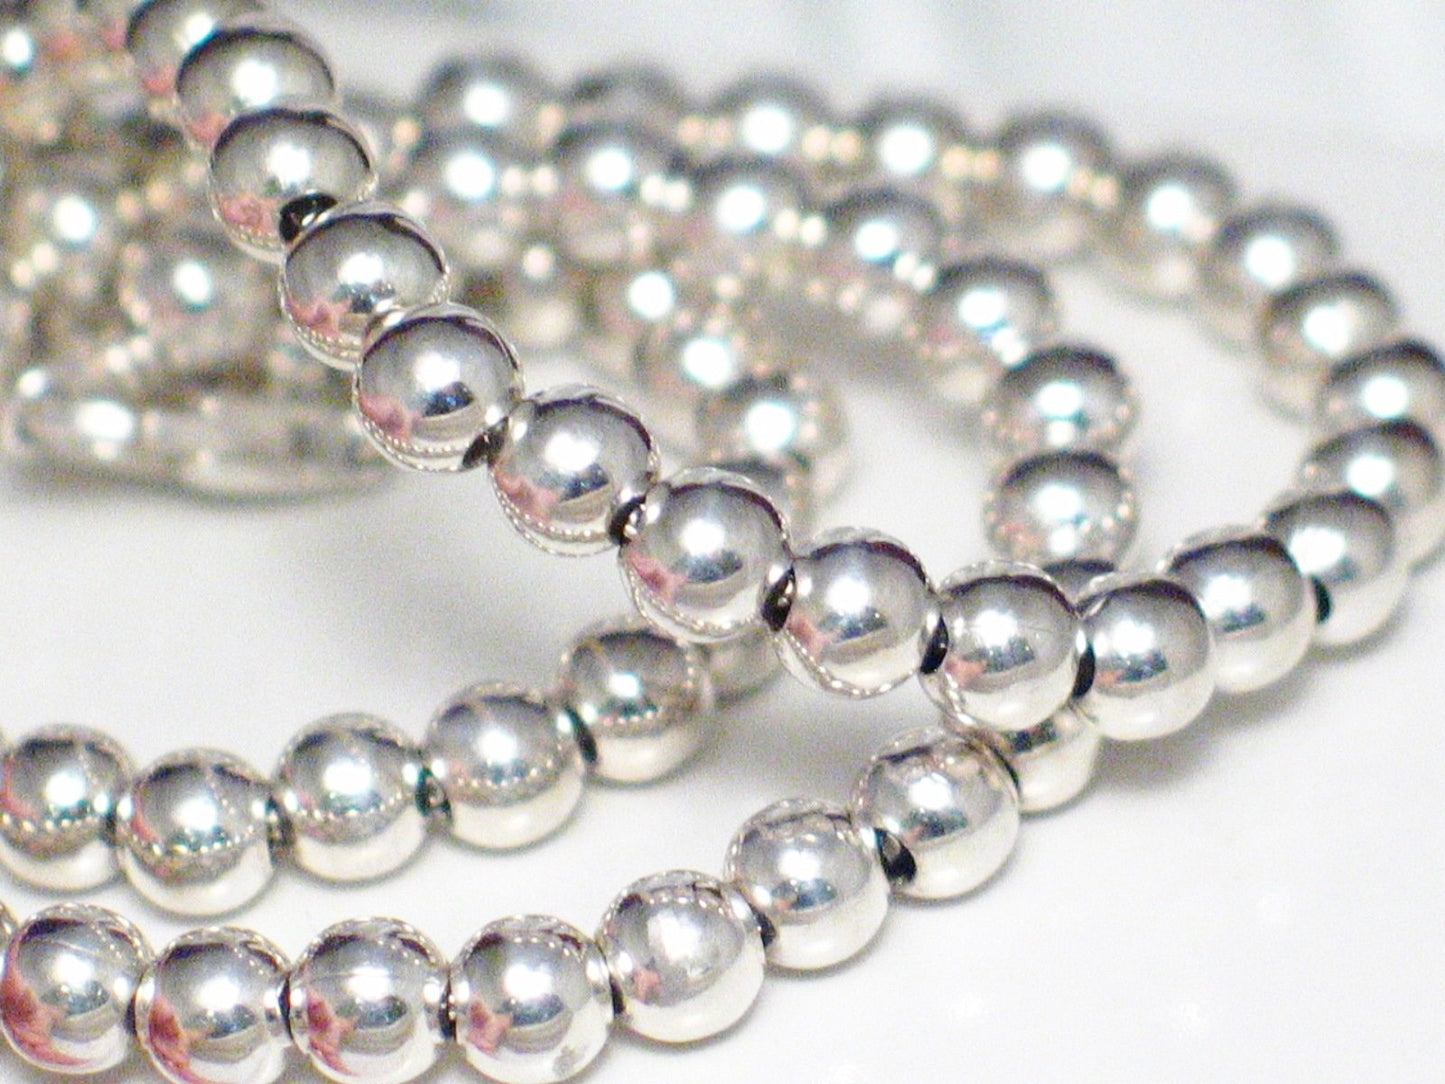 Ball Chain Necklace, 20.25" 5mm Round Sterling Silver Bead Chain Necklace